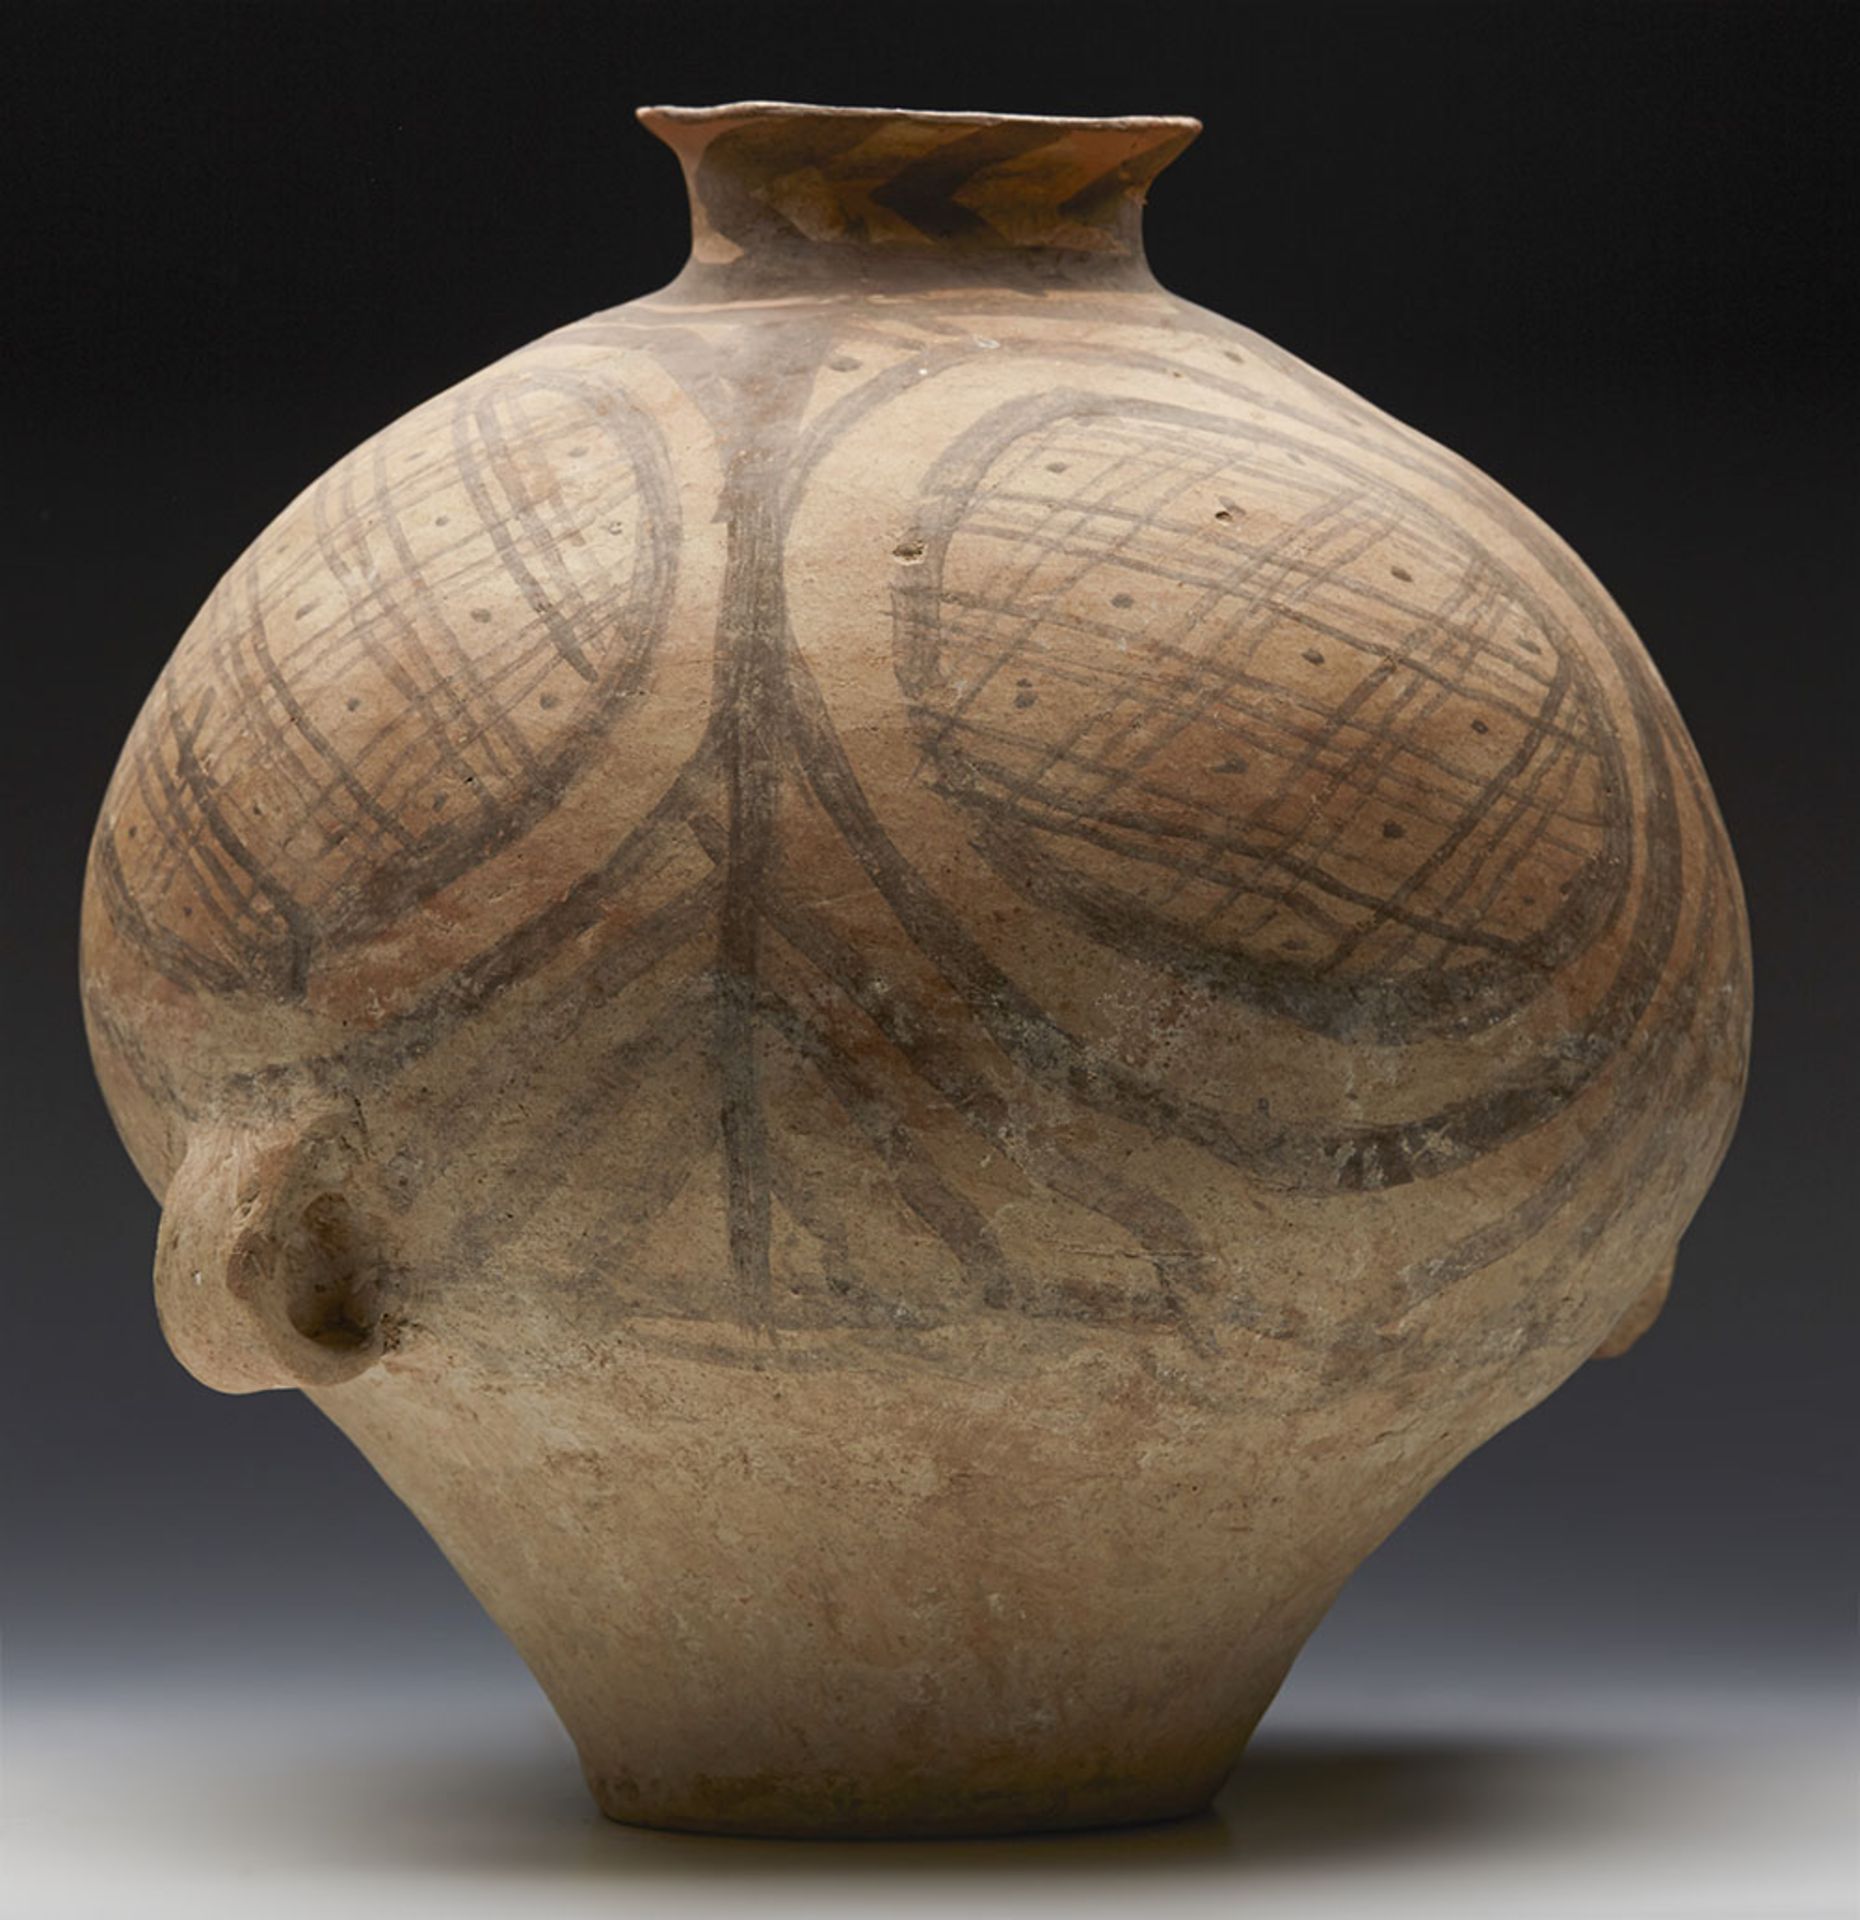 Neolithic Chinese Terracotta Twin Handled Jar 3Rd Millennium Bc - Image 7 of 11